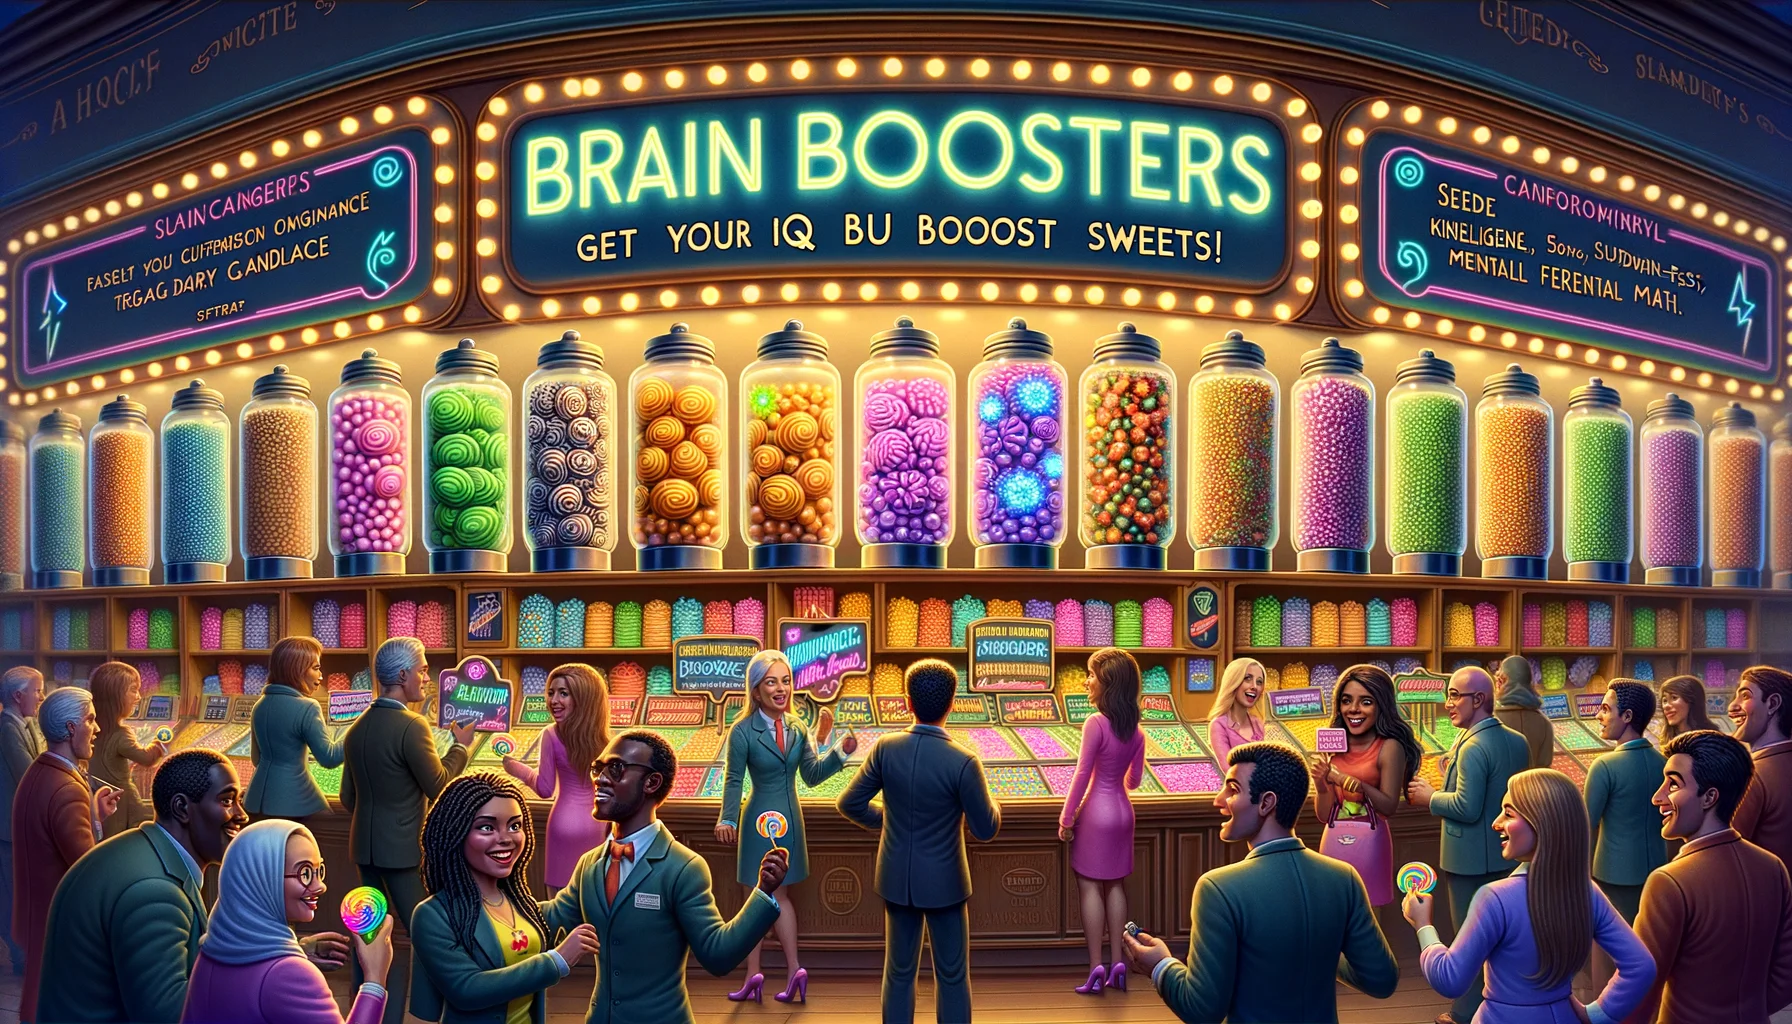 Envision a light-hearted humorous scene featuring 'Brain Function Enhancing Sweets'. The image presents a richly detailed candy store with shelves filled by jars of colorful luminous candy labeled 'Brain Boosters'. These candies sparkle with intelligence, creating an aura of knowledge around them. A mix of customers of differing descents (Black, Hispanic, Middle-Eastern, South Asian, and Caucasian), both male and female, are eagerly purchasing and tasting these candies. Some customers experience amusing effects after consuming the sweets, such as sudden fluency in multiple languages or lightning-fast mental math. The store signage is humorously exaggerated with phrases like 'Get your IQ boost here!', in softly glowing neon.